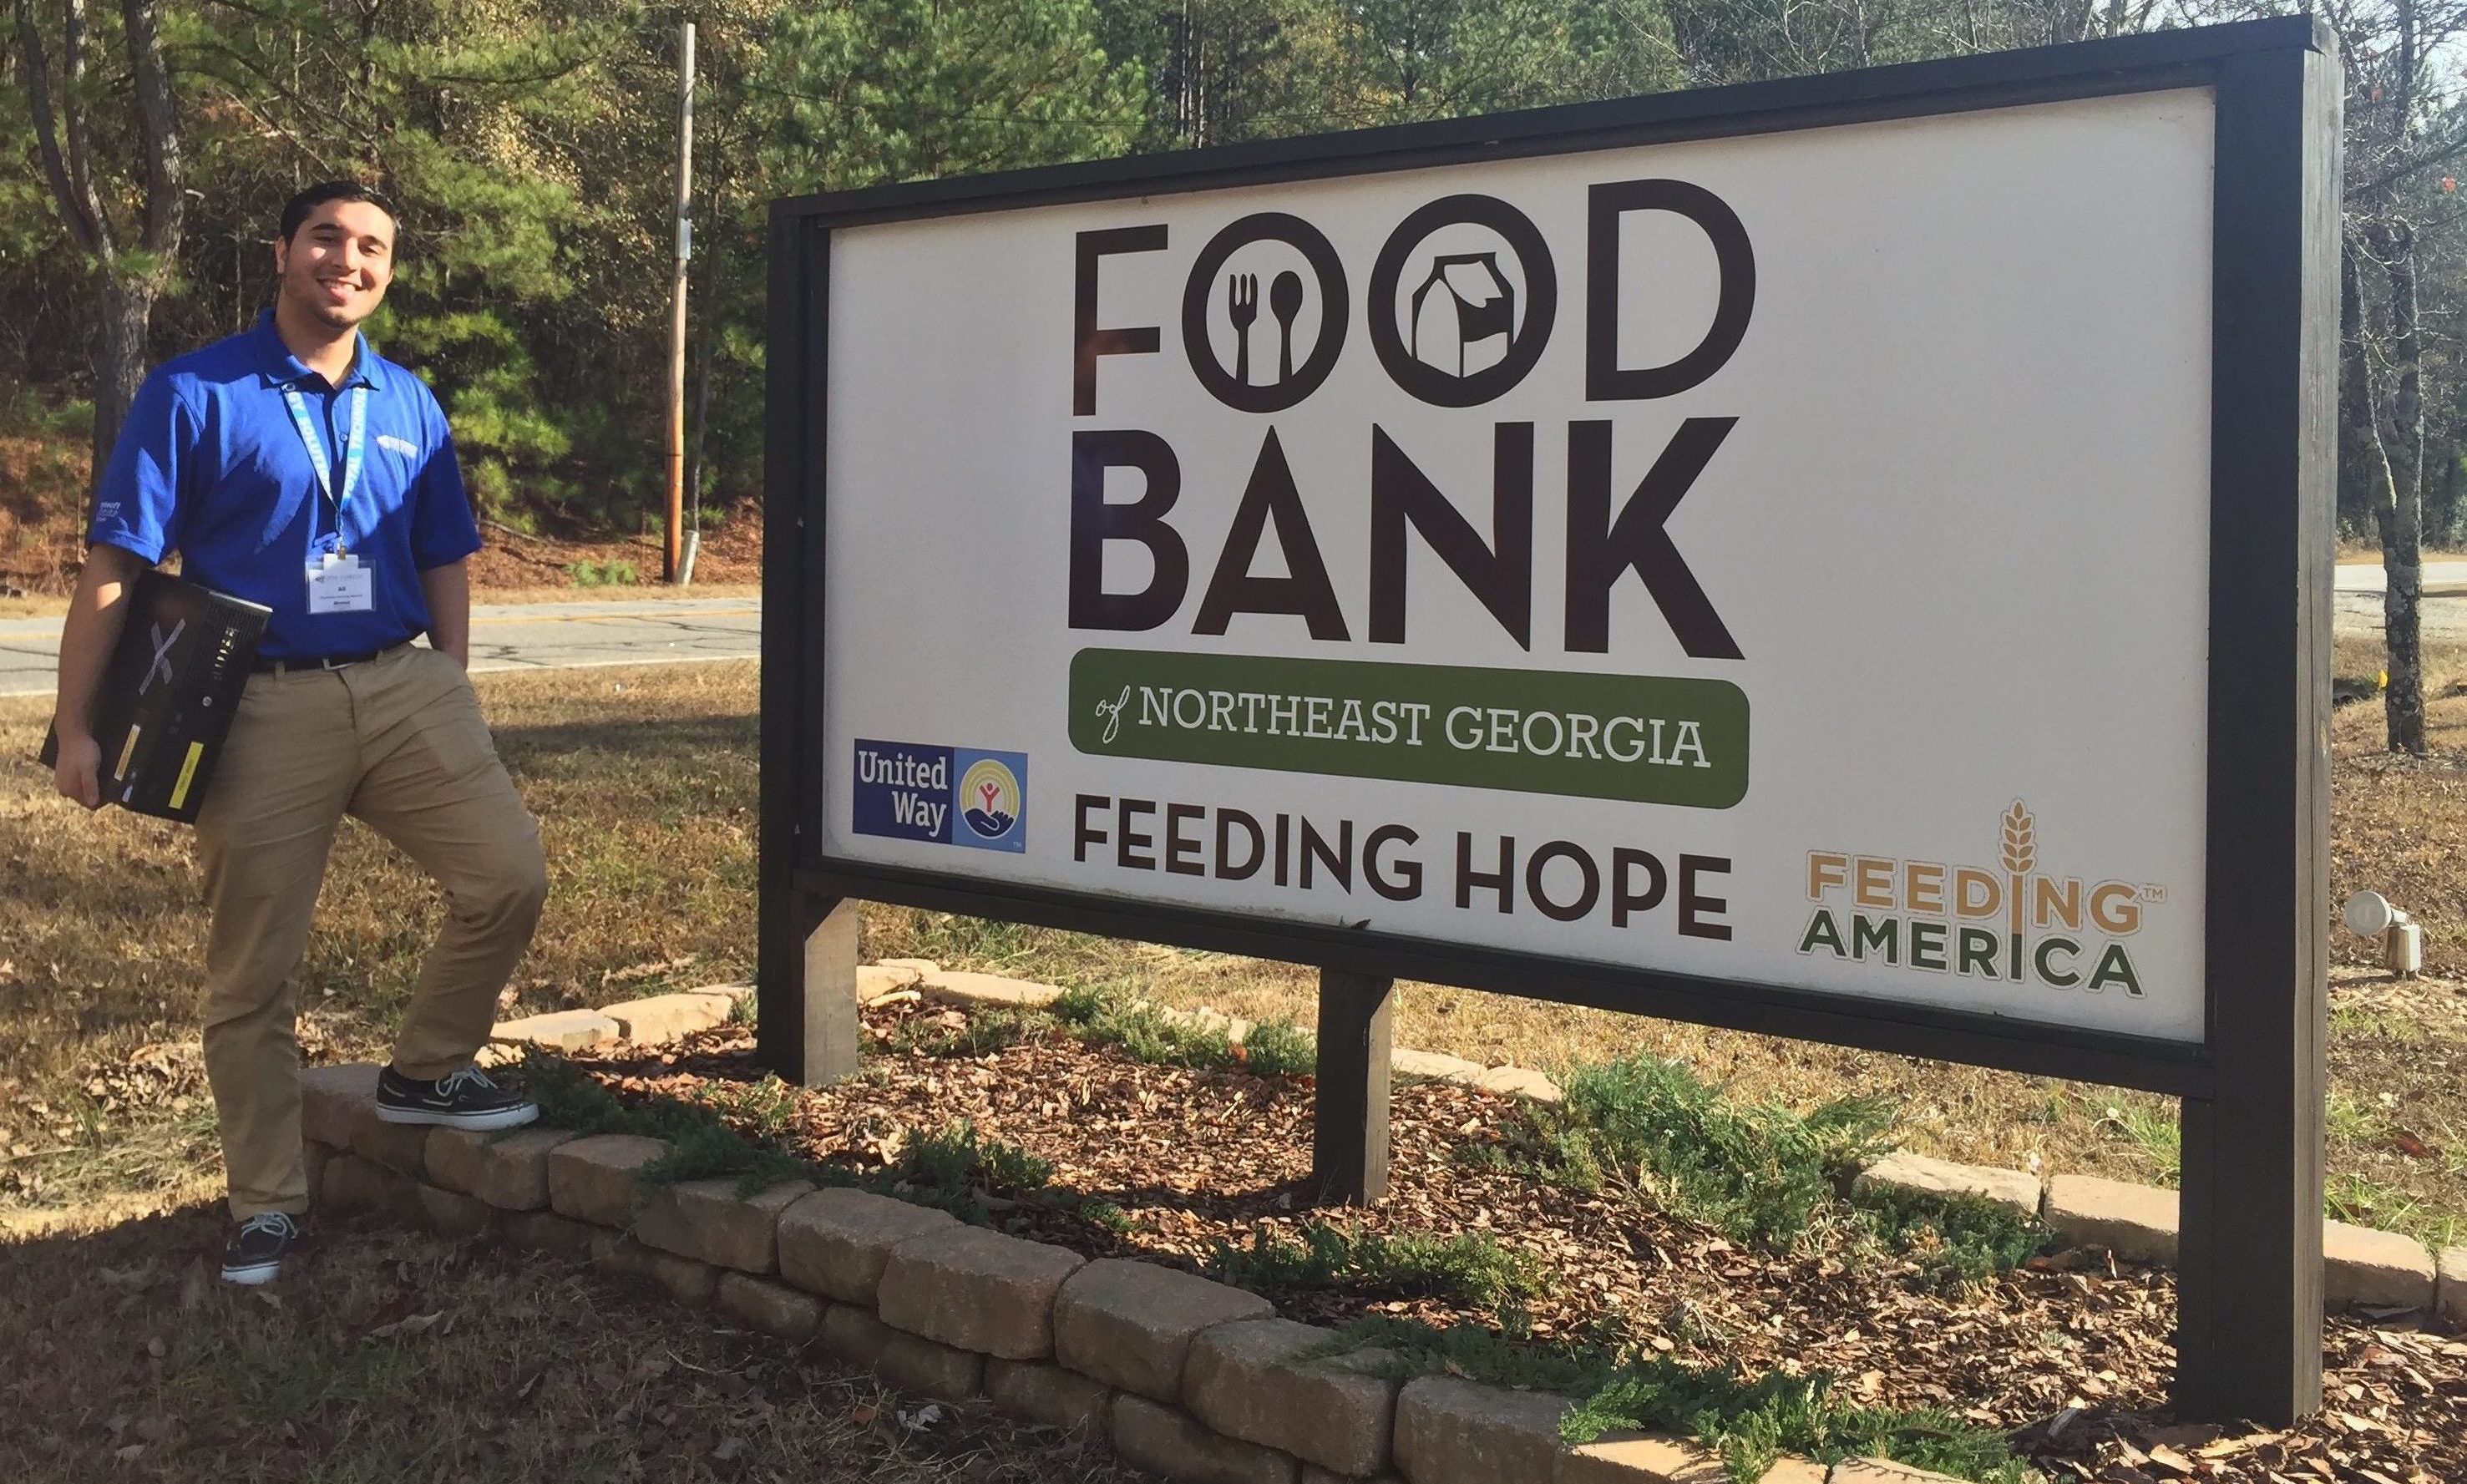 Total Technology Helps Food Bank Give Back